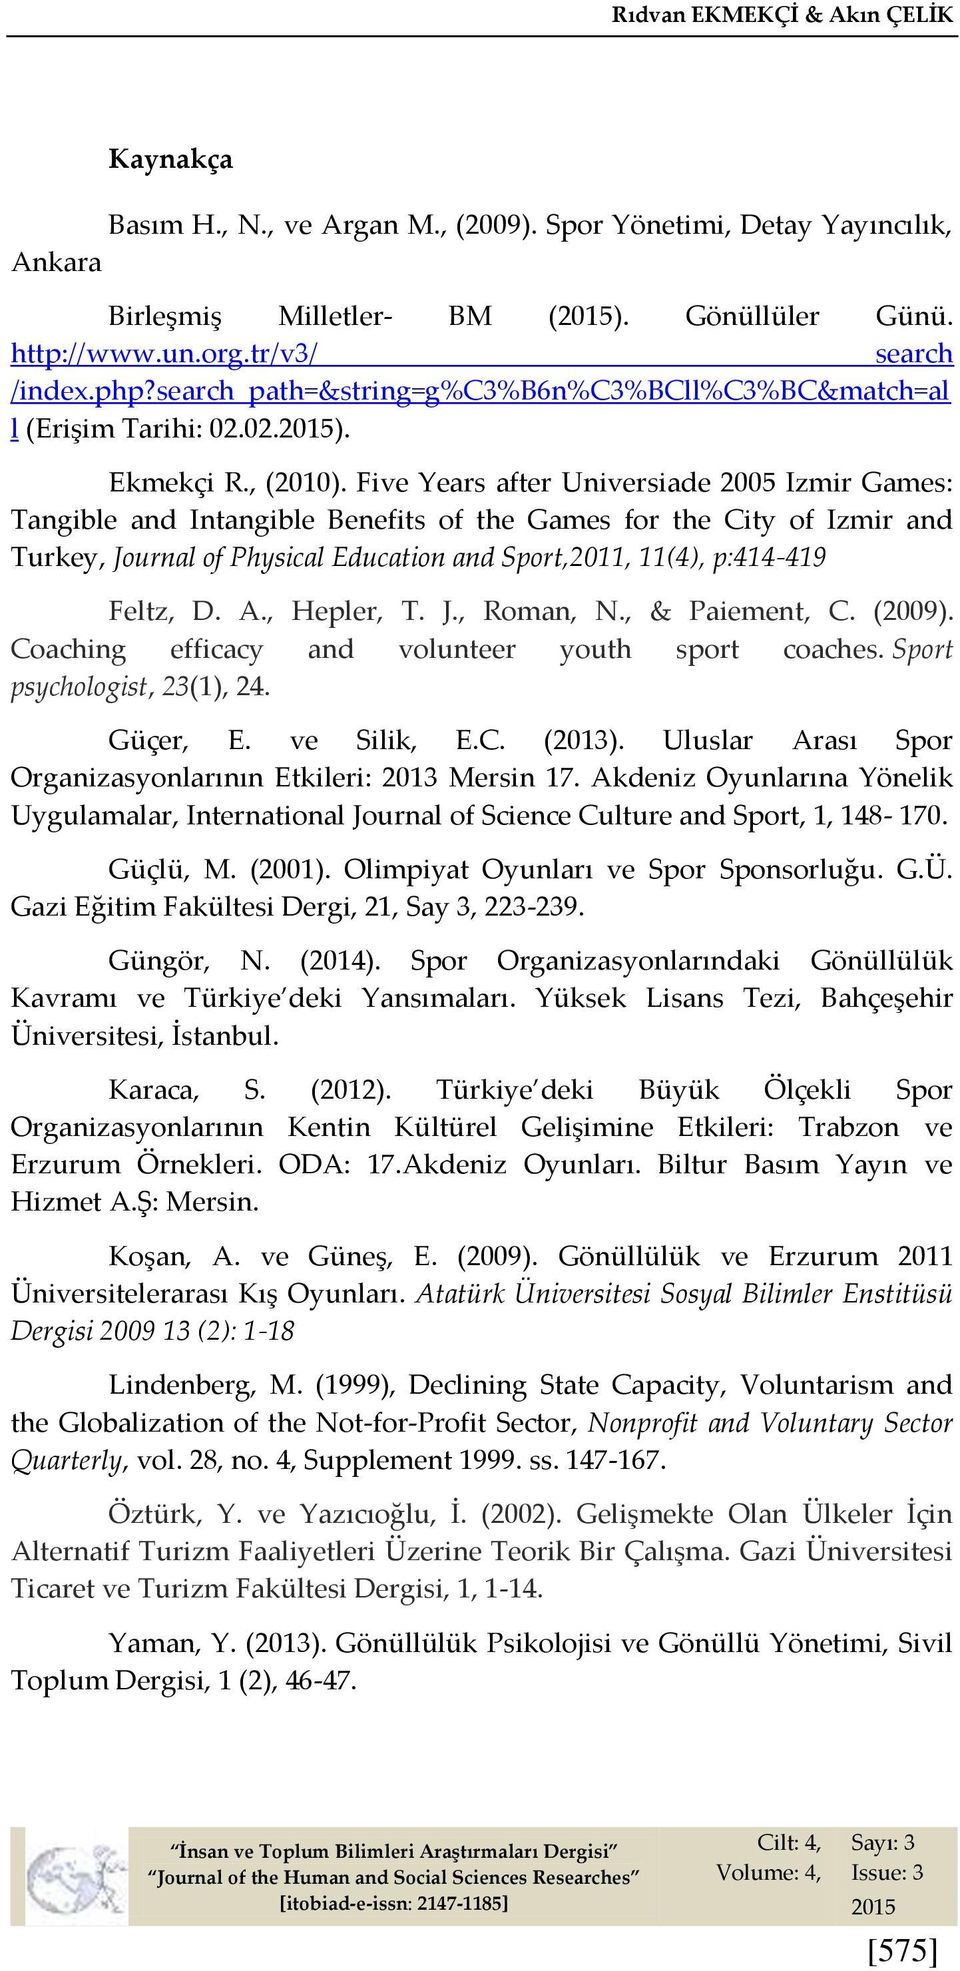 Five Years after Universiade 2005 Izmir Games: Tangible and Intangible Benefits of the Games for the City of Izmir and Turkey, Journal of Physical Education and Sport,2011, 11(4), p:414-419 Feltz, D.